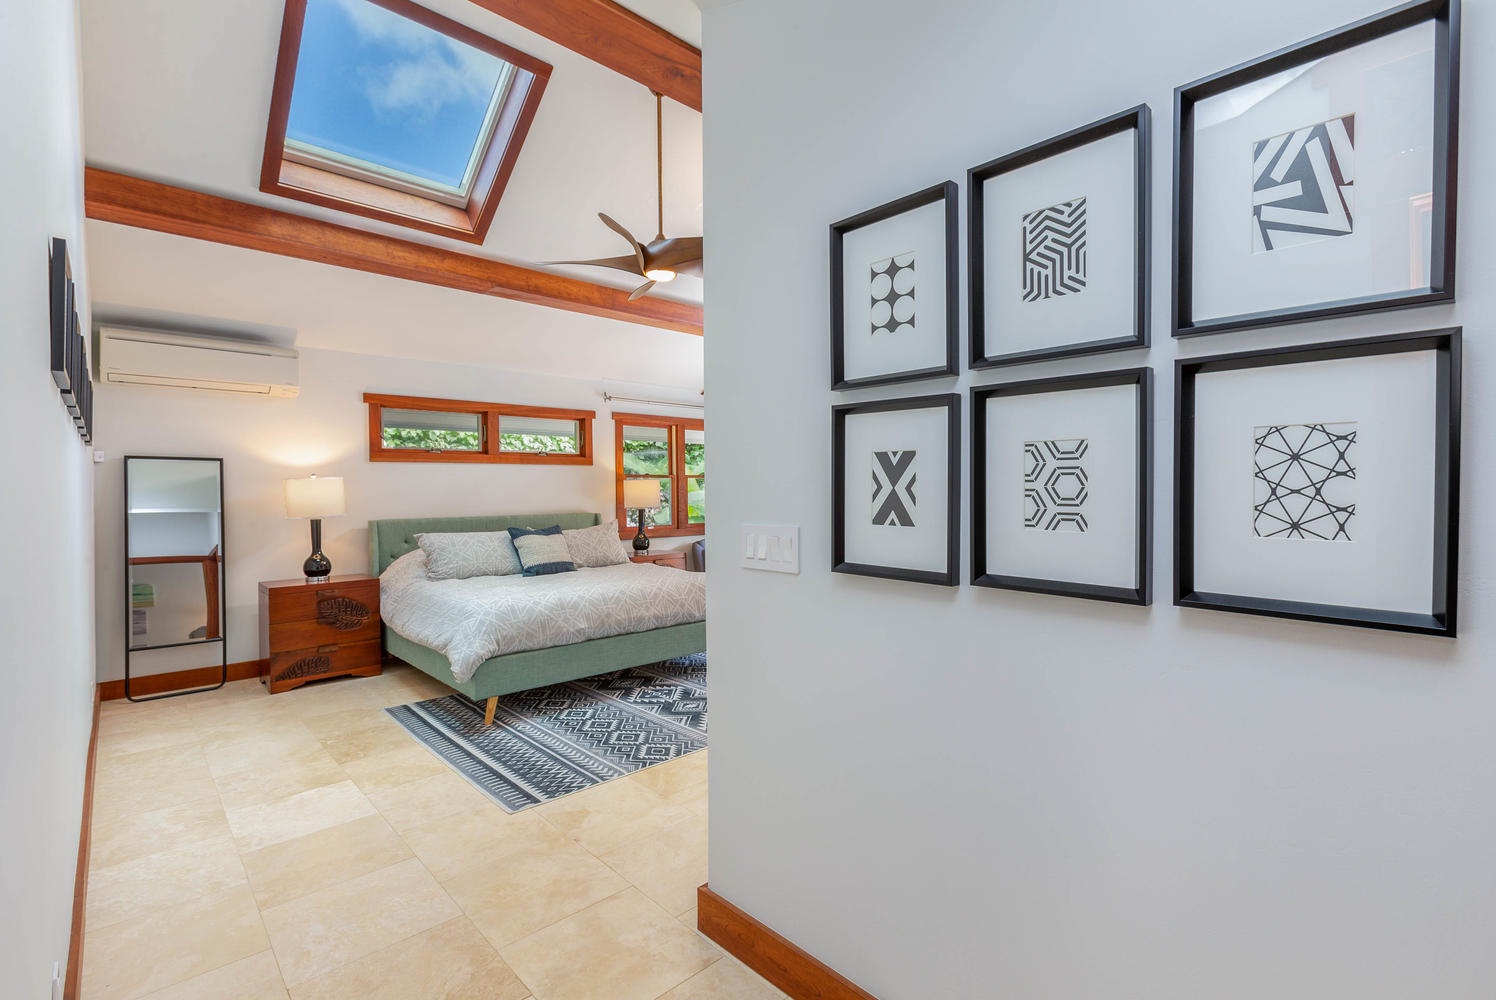 Princeville Vacation Rentals, Makana Lei - The primary bedroom has lovely natural light